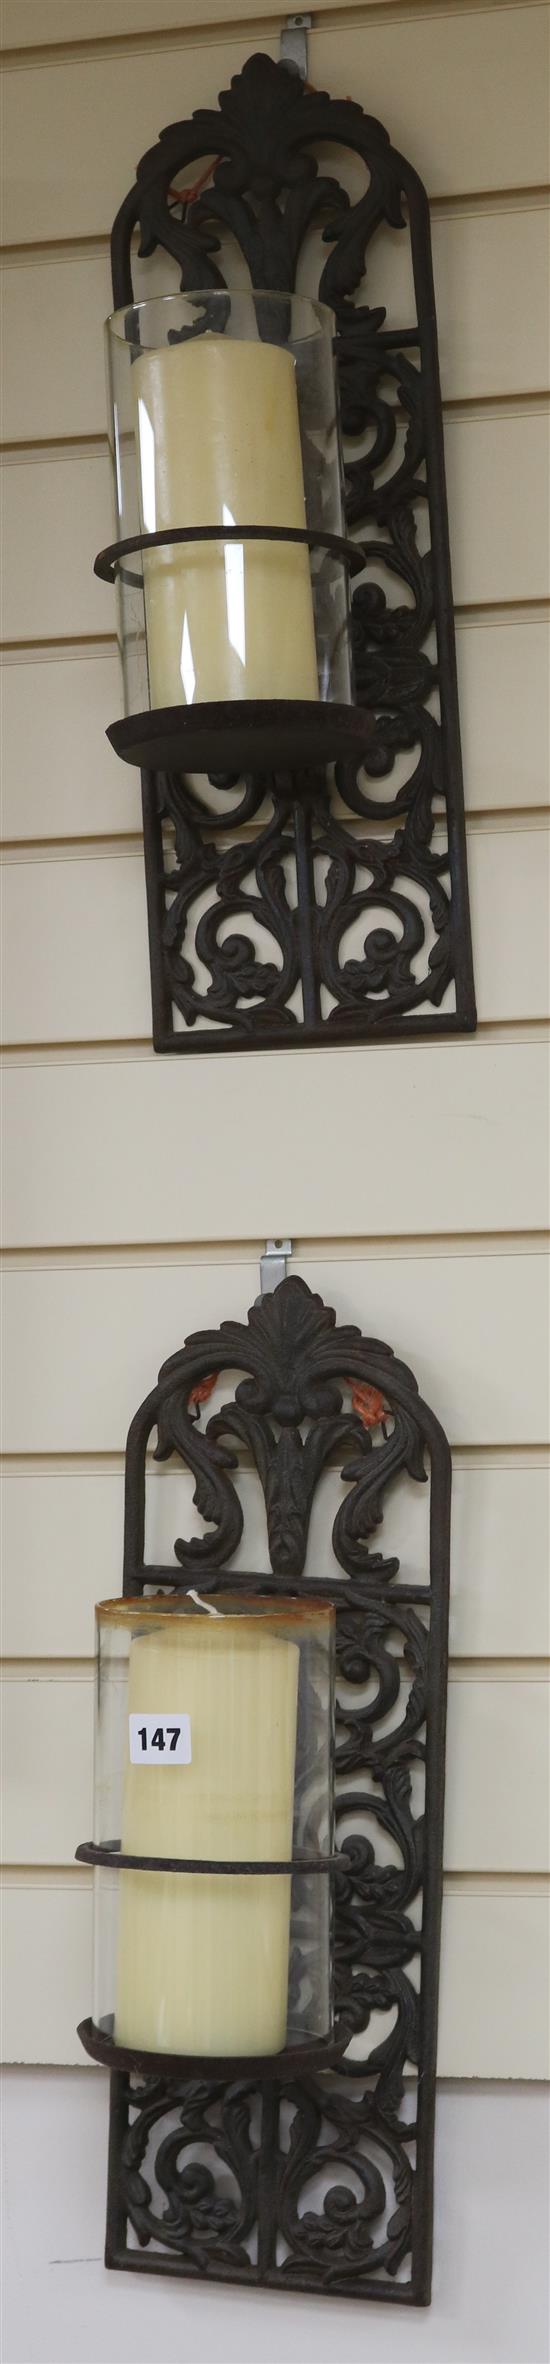 A pair of cast iron wall sconces with candles